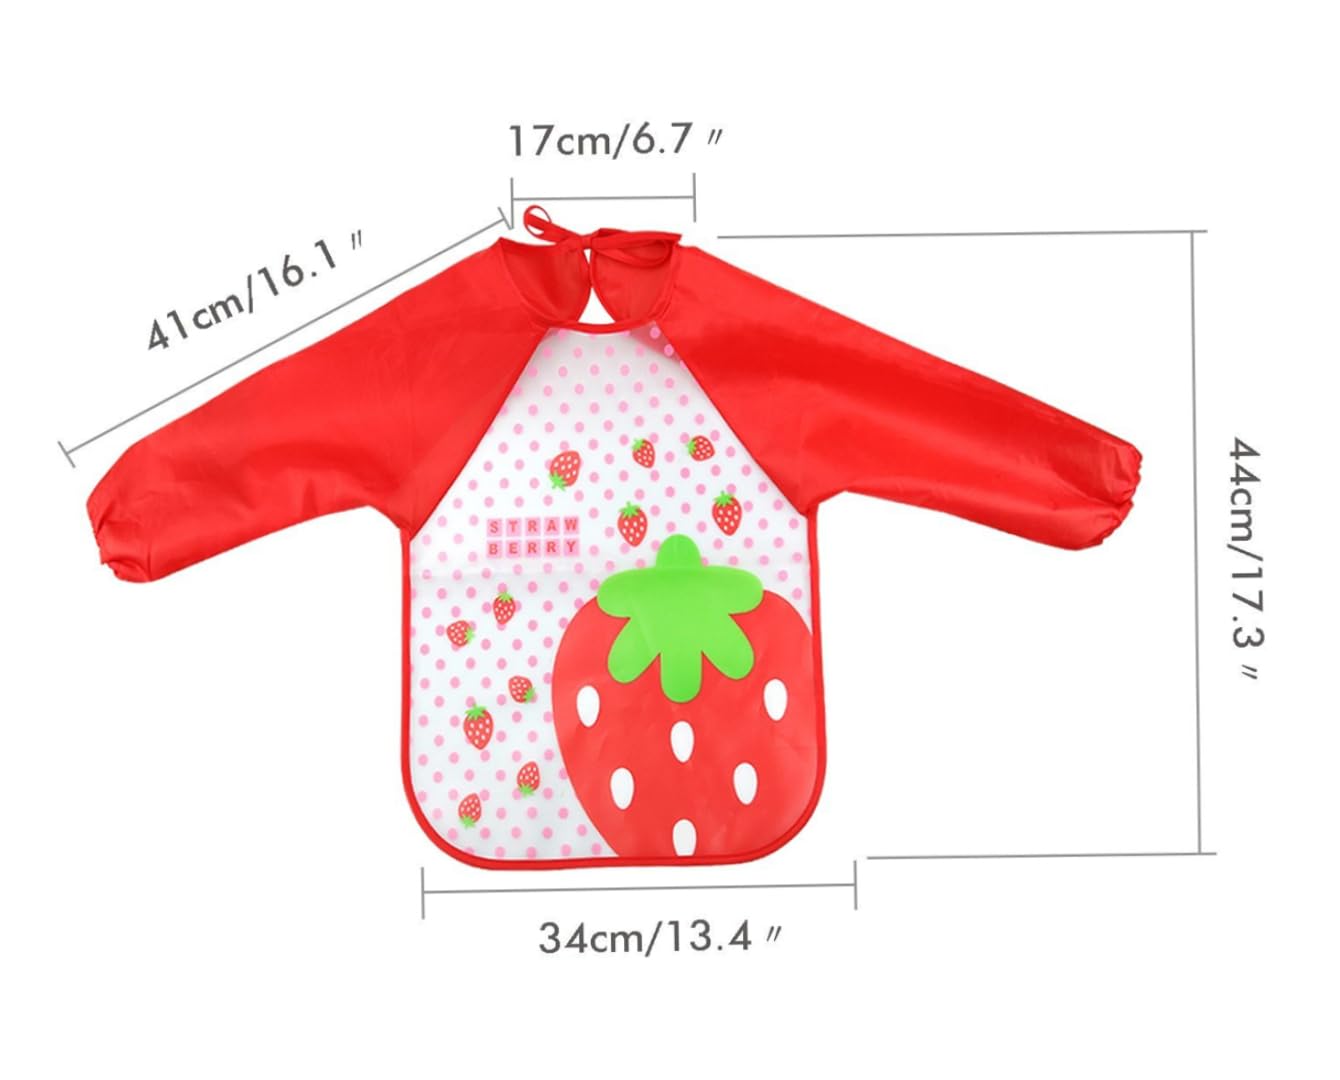 Zoxjixc DELANTAL Art Smock Kids Paint Waterproof Waterproof Amps Smock with Long at Random -Colored Sleeves for Young Children